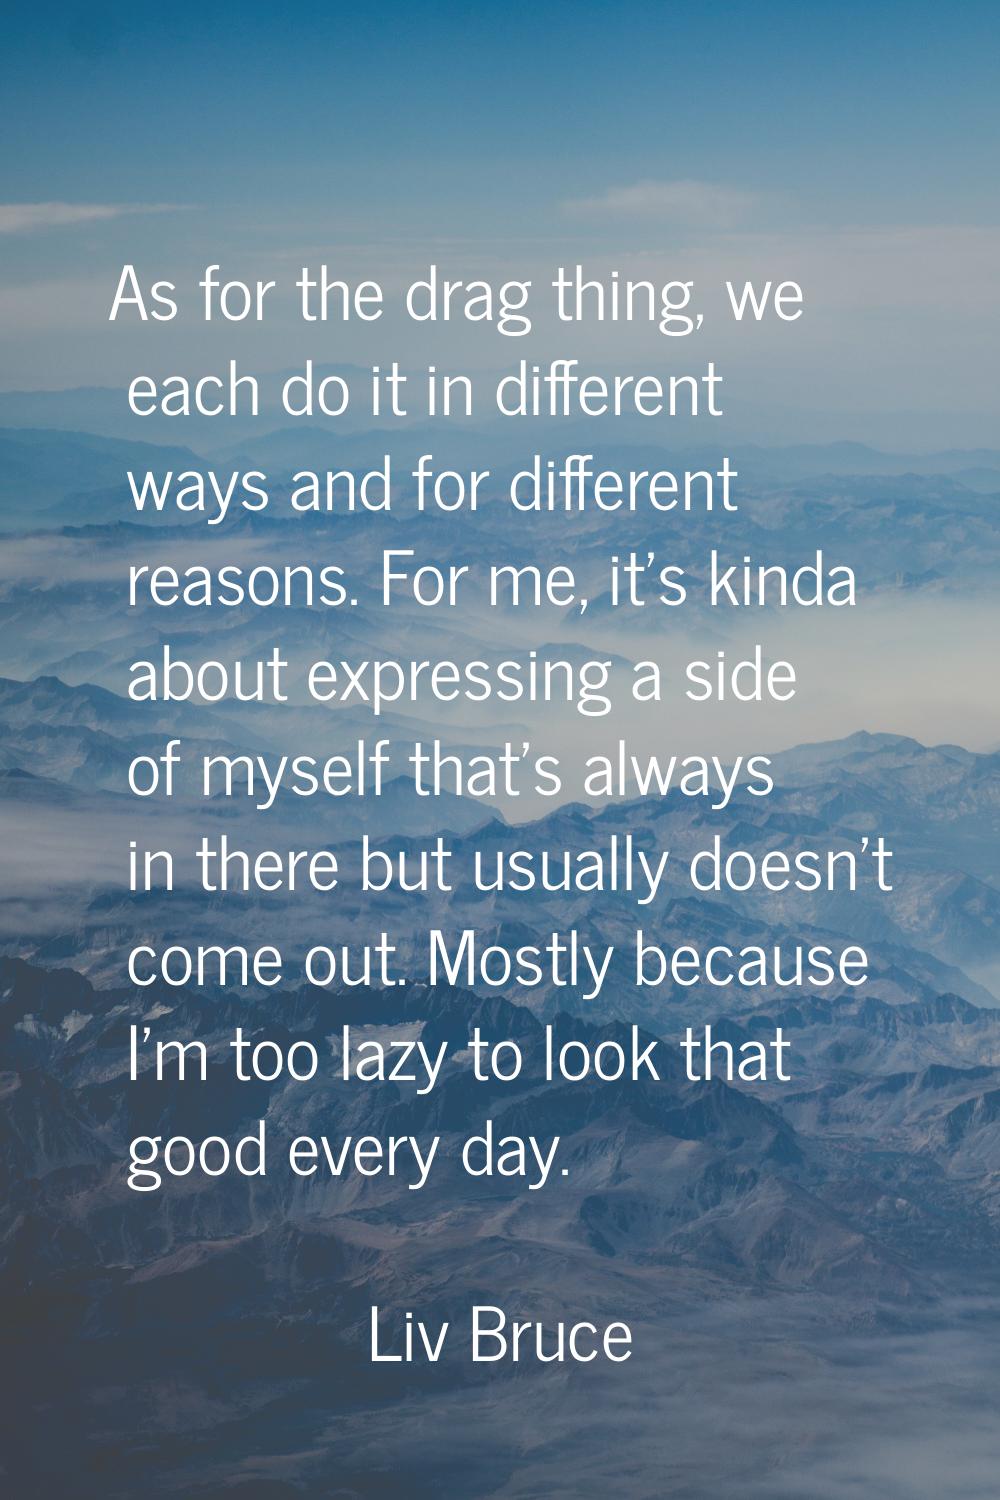 As for the drag thing, we each do it in different ways and for different reasons. For me, it's kind